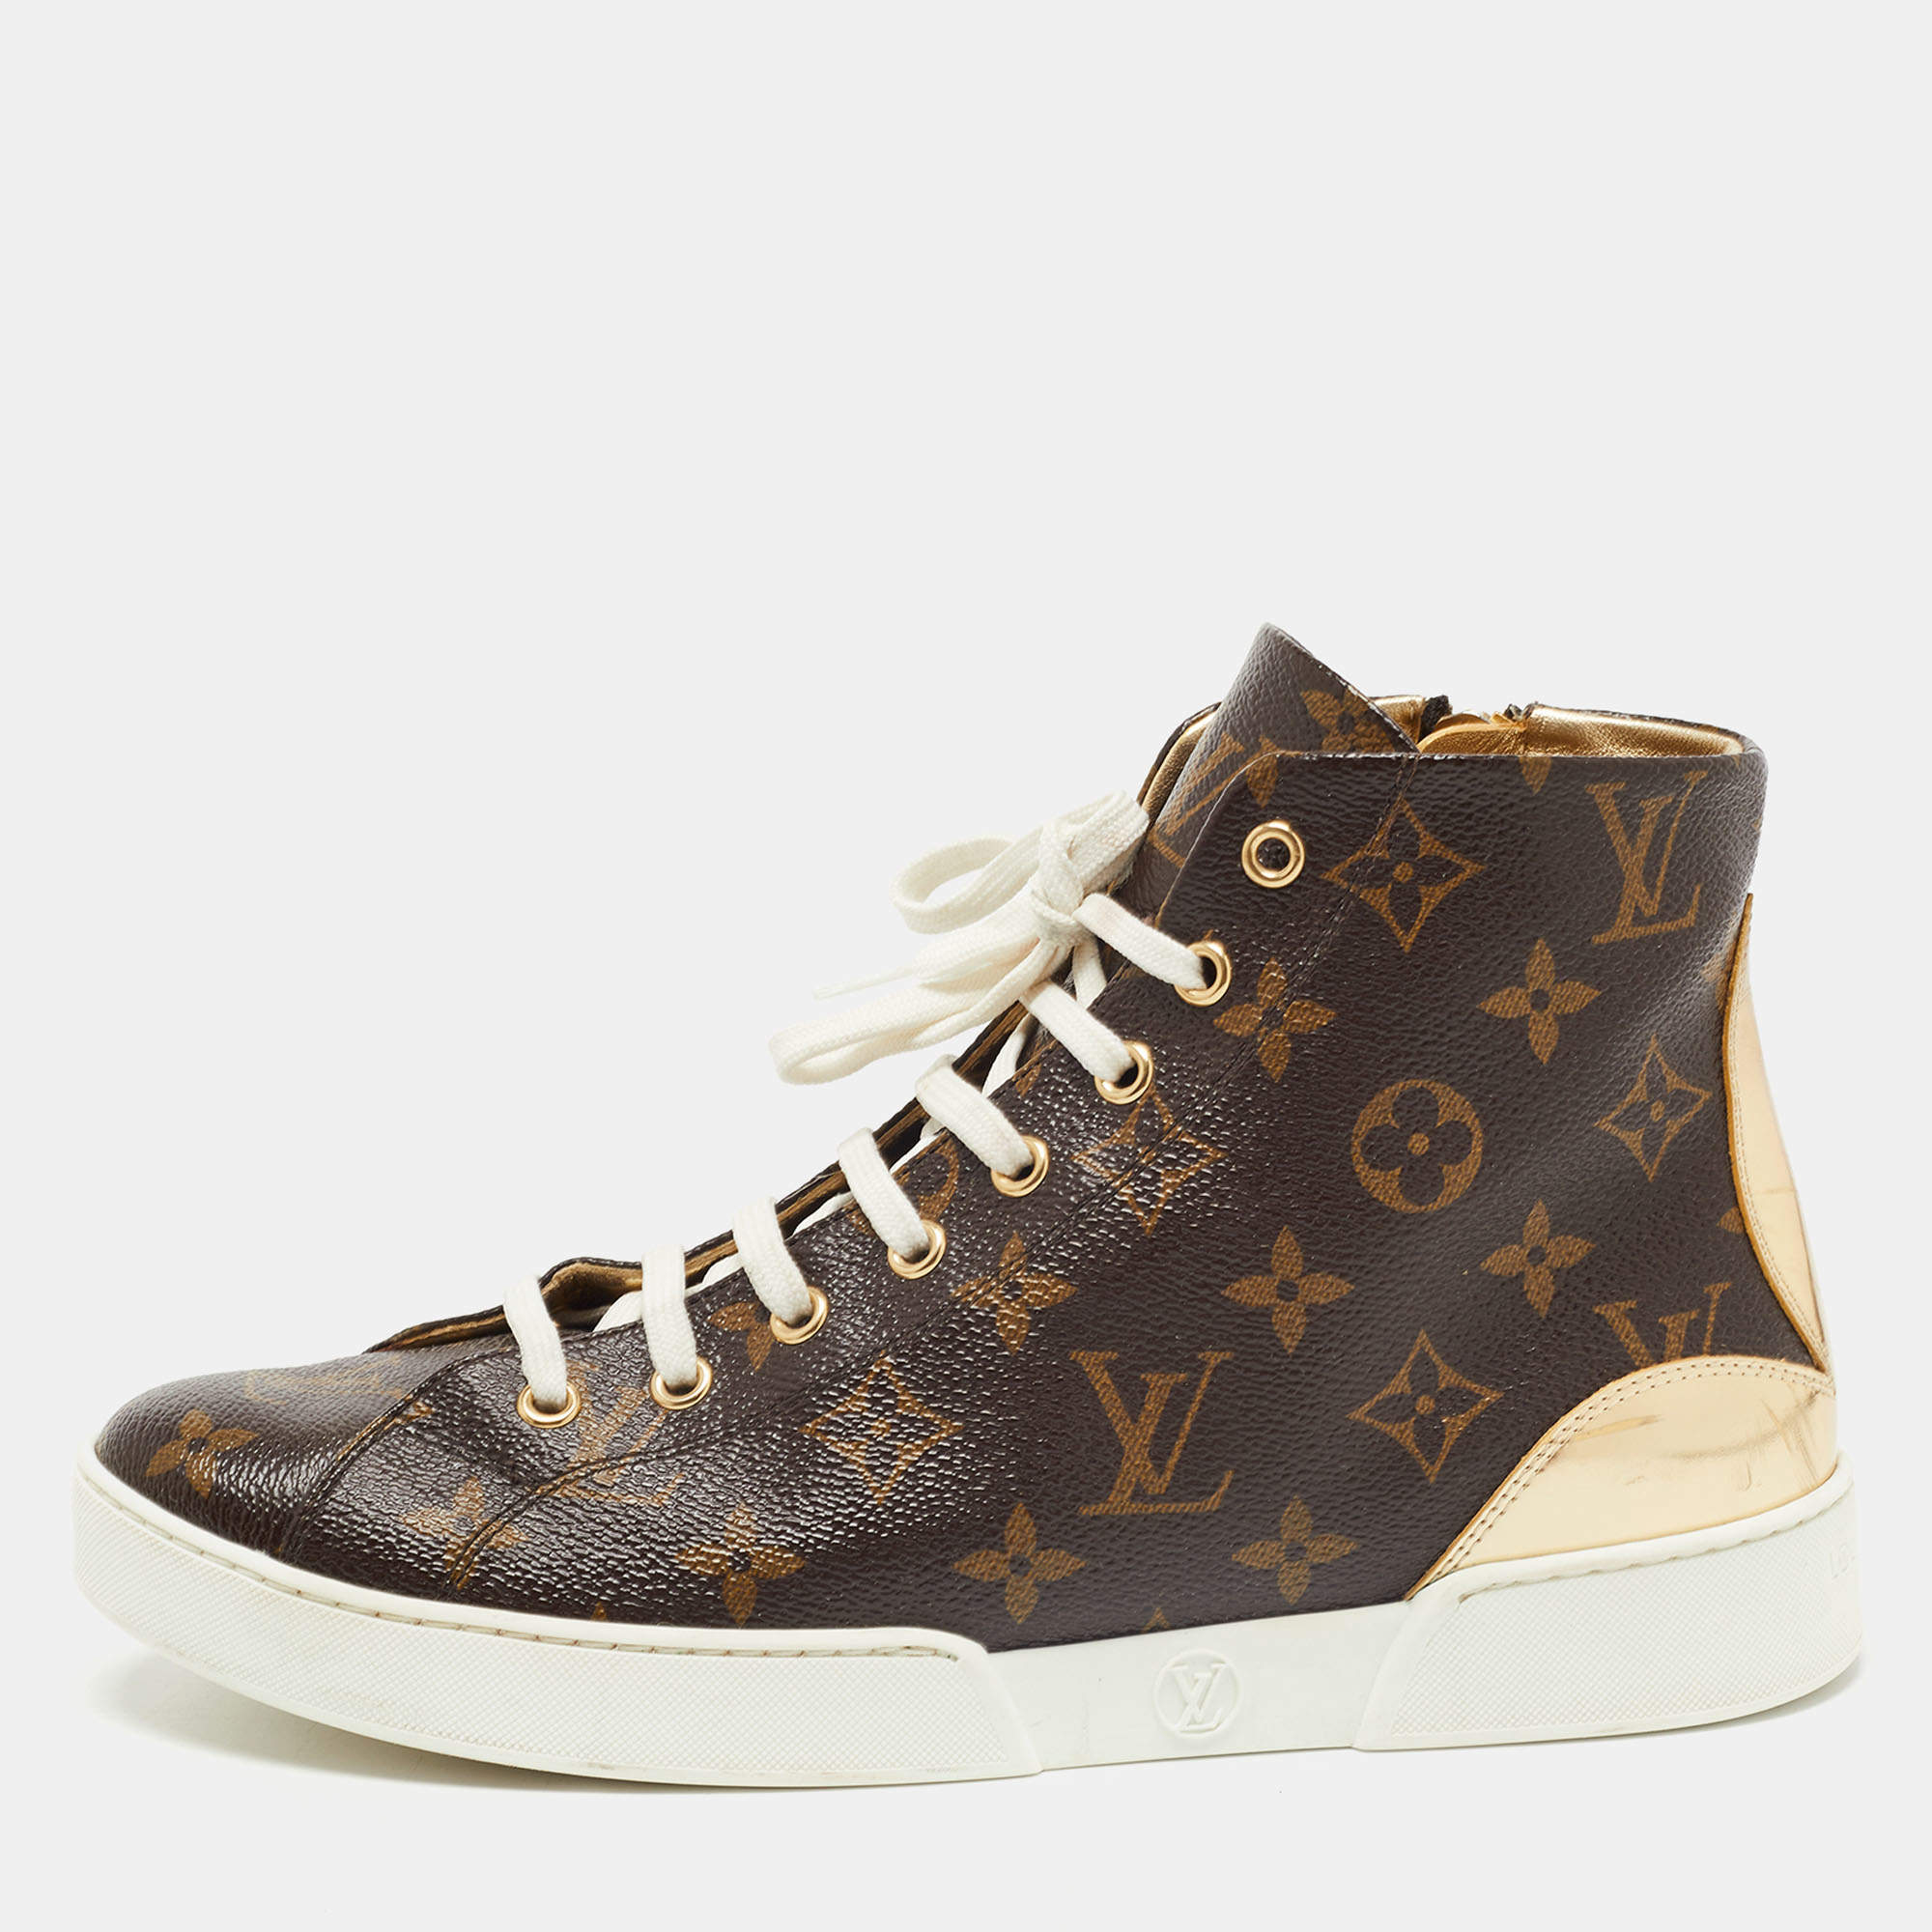 Louis Vuitton Brown Monogram Canvas and Leather Stellar Sneakers Size 39  Louis Vuitton